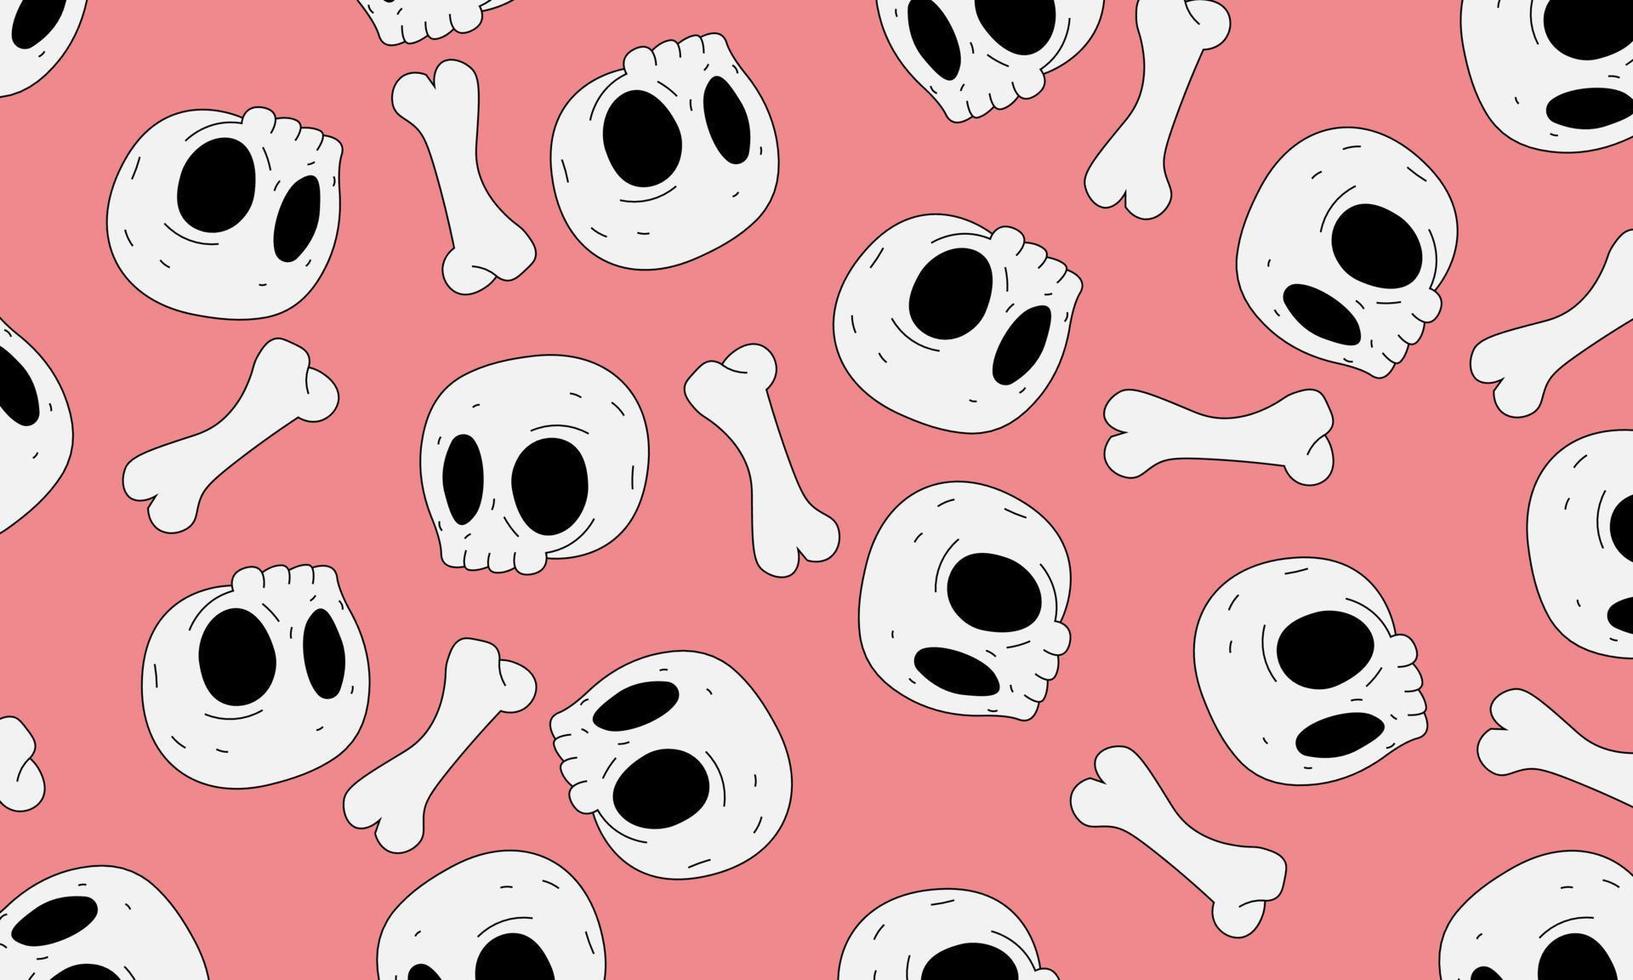 Skull and bone cartoon in doodle style on pink background. vector